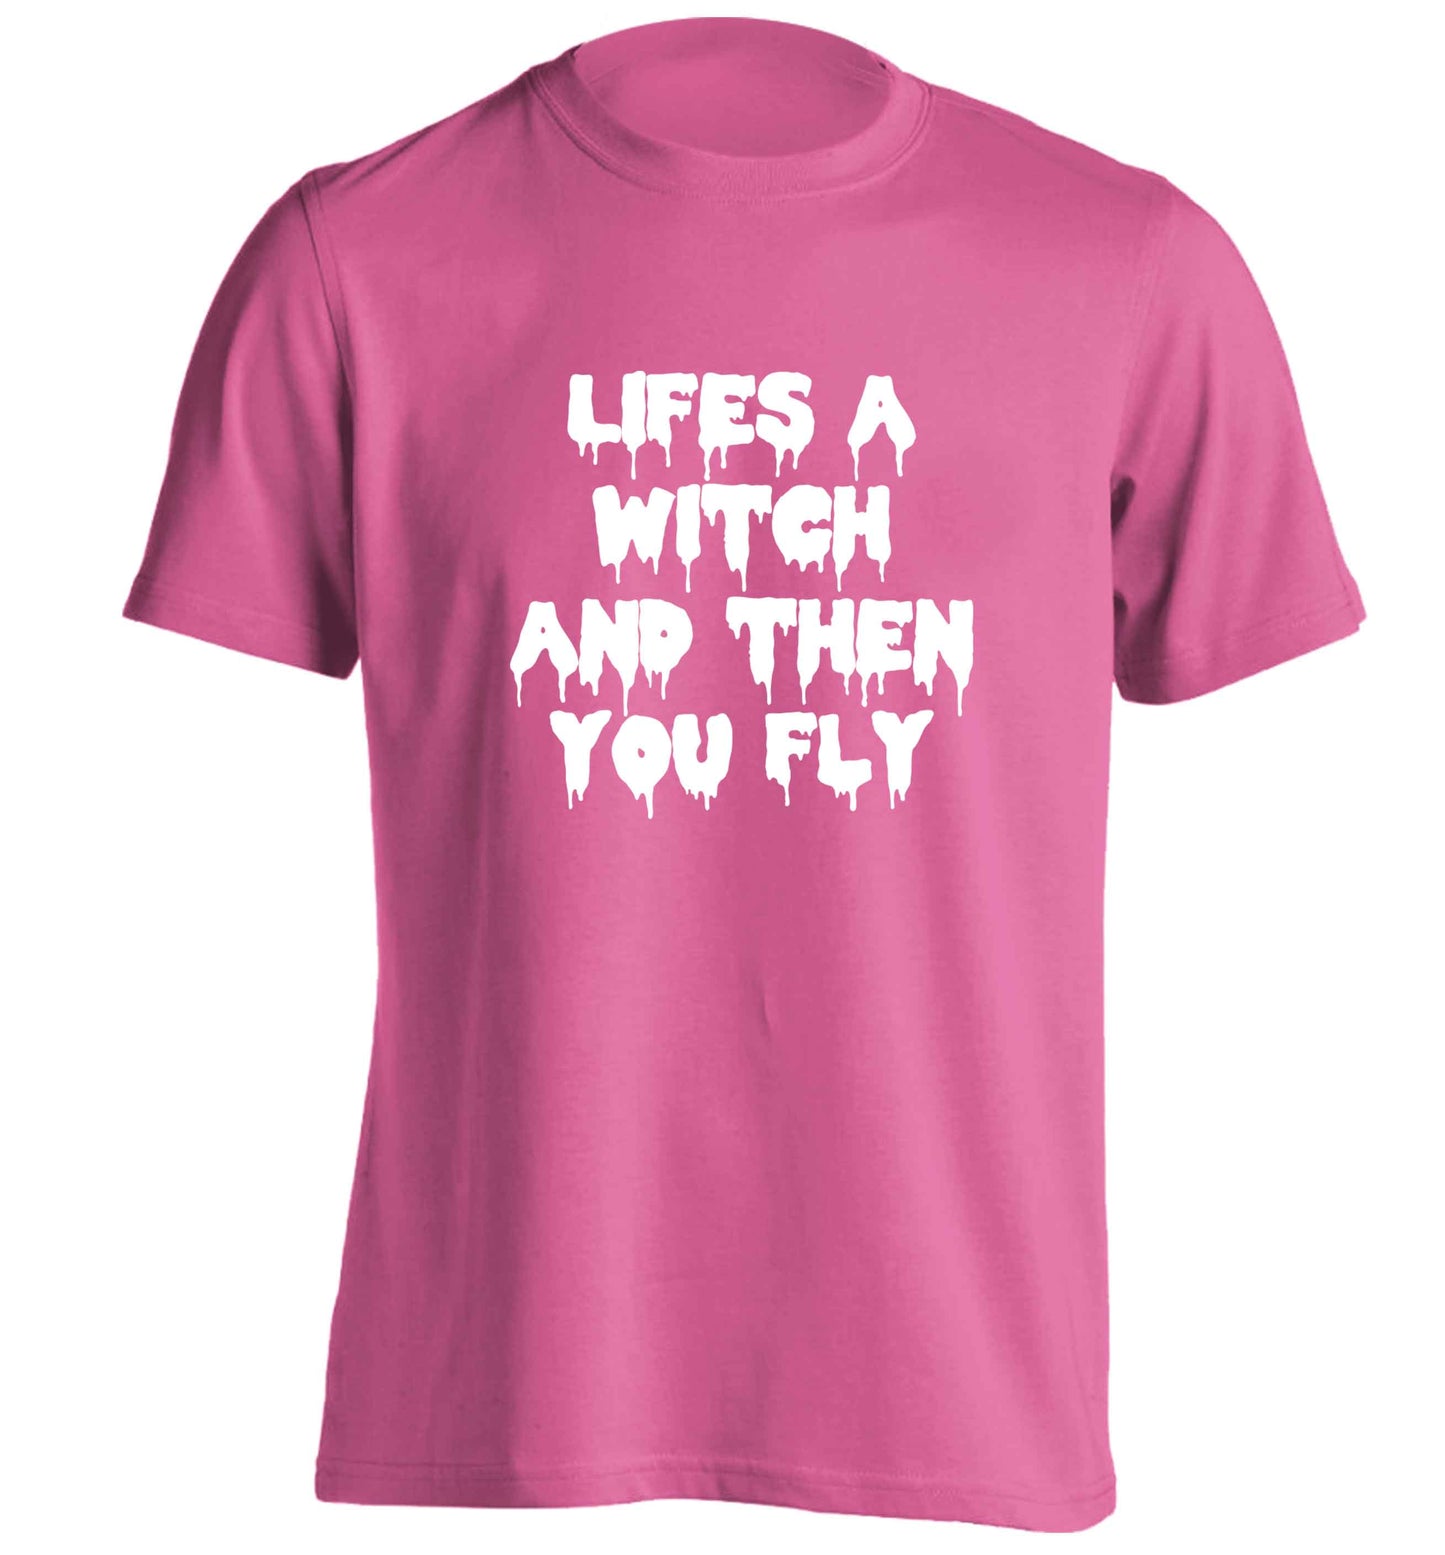 Life's a witch and then you fly adults unisex pink Tshirt 2XL